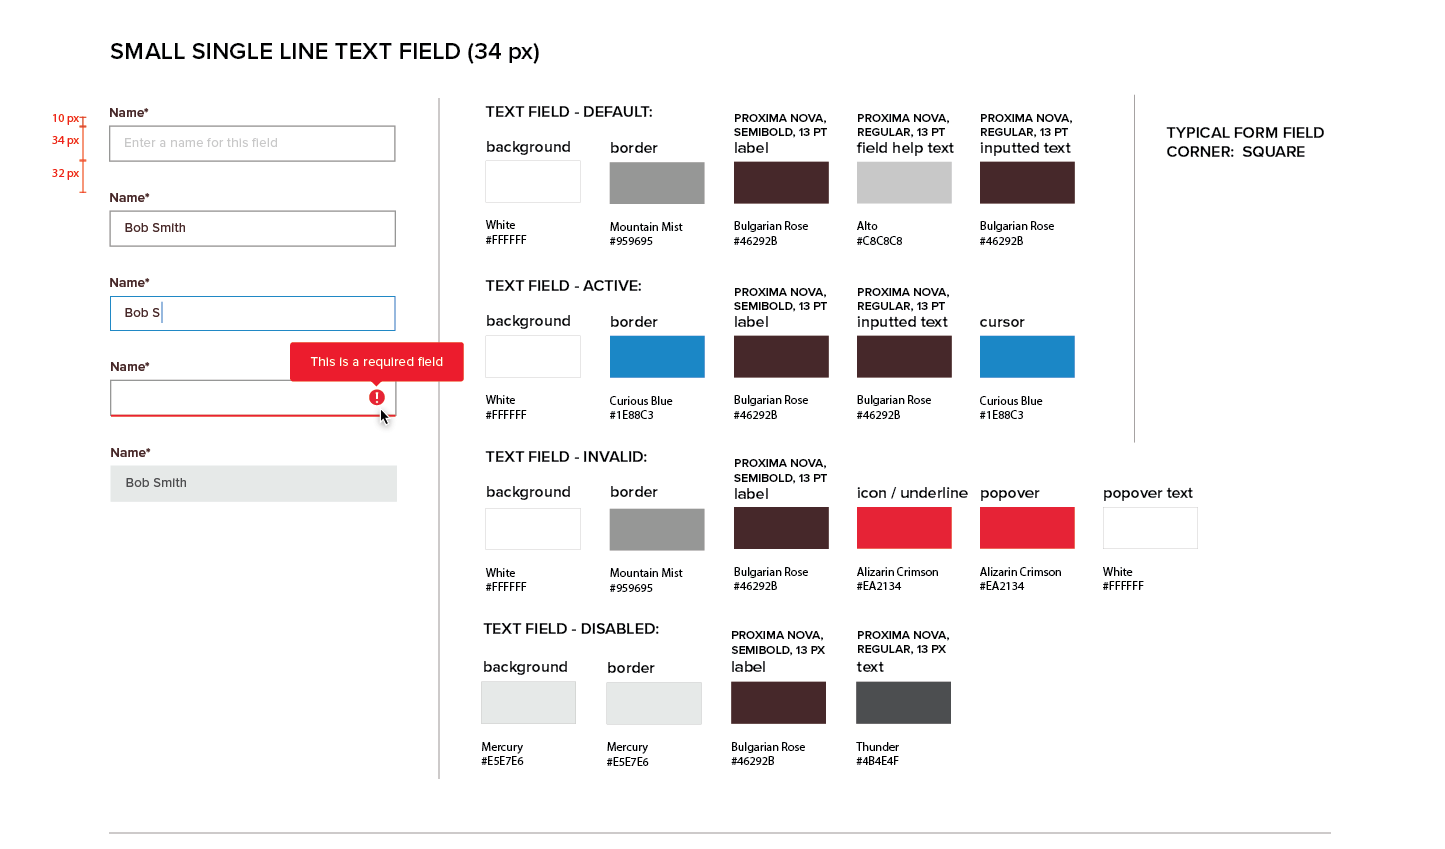 Persona Bar Style Guide - Small Single-Line Text Field